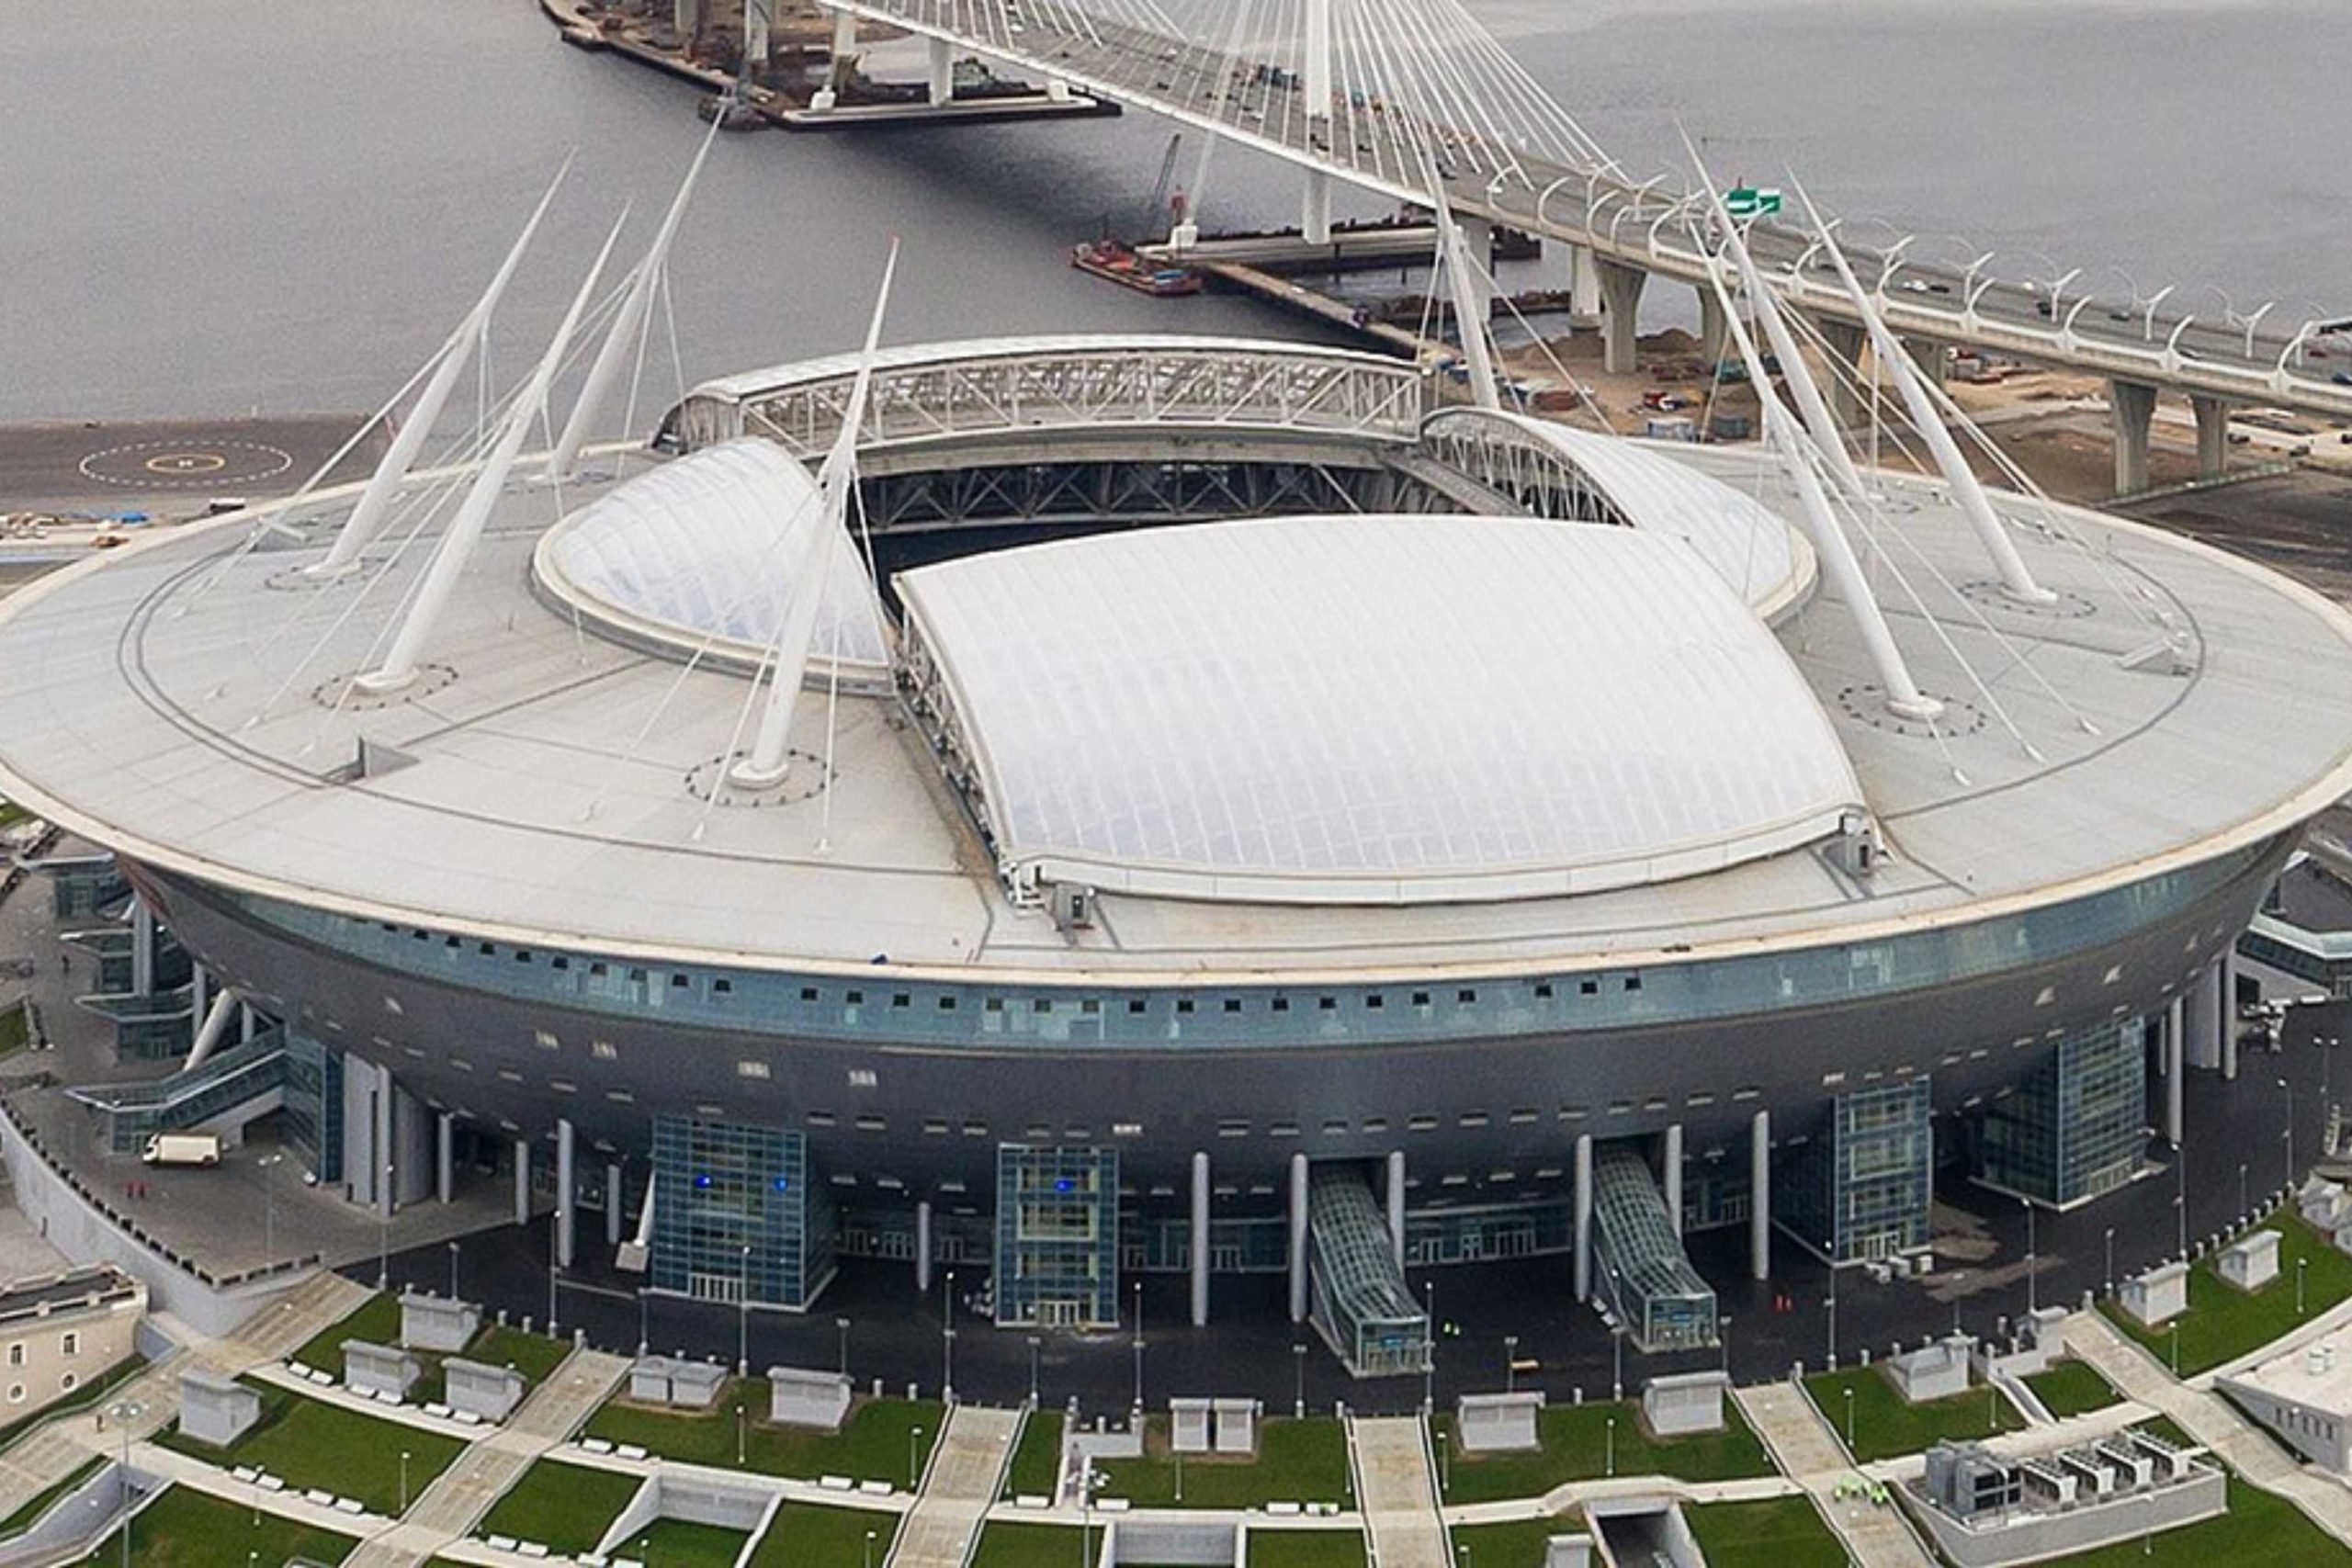 Midea Air Conditioners are installed in world cup stadiums all around the world